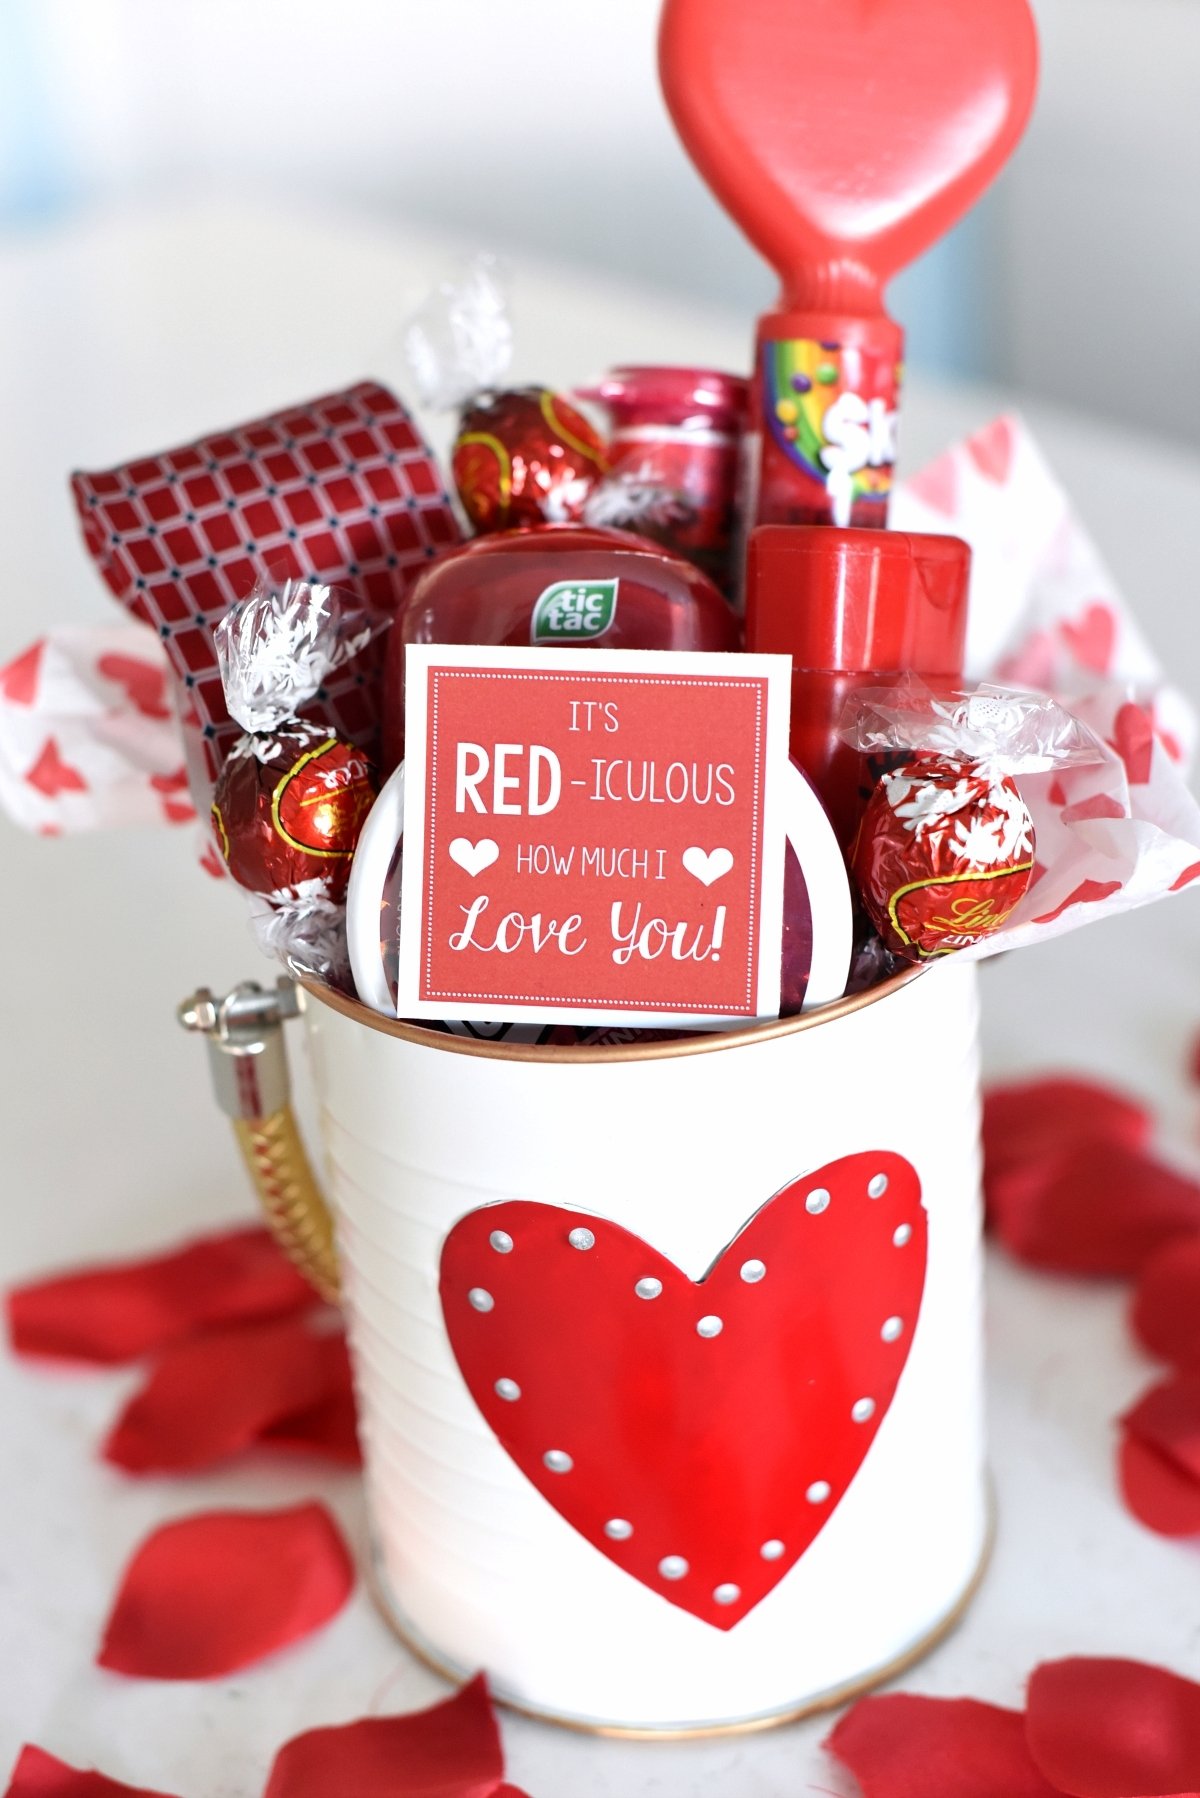 10 Most Popular Fun Ideas For Valentines Day cute valentines day gift idea red iculous basket 8 2022